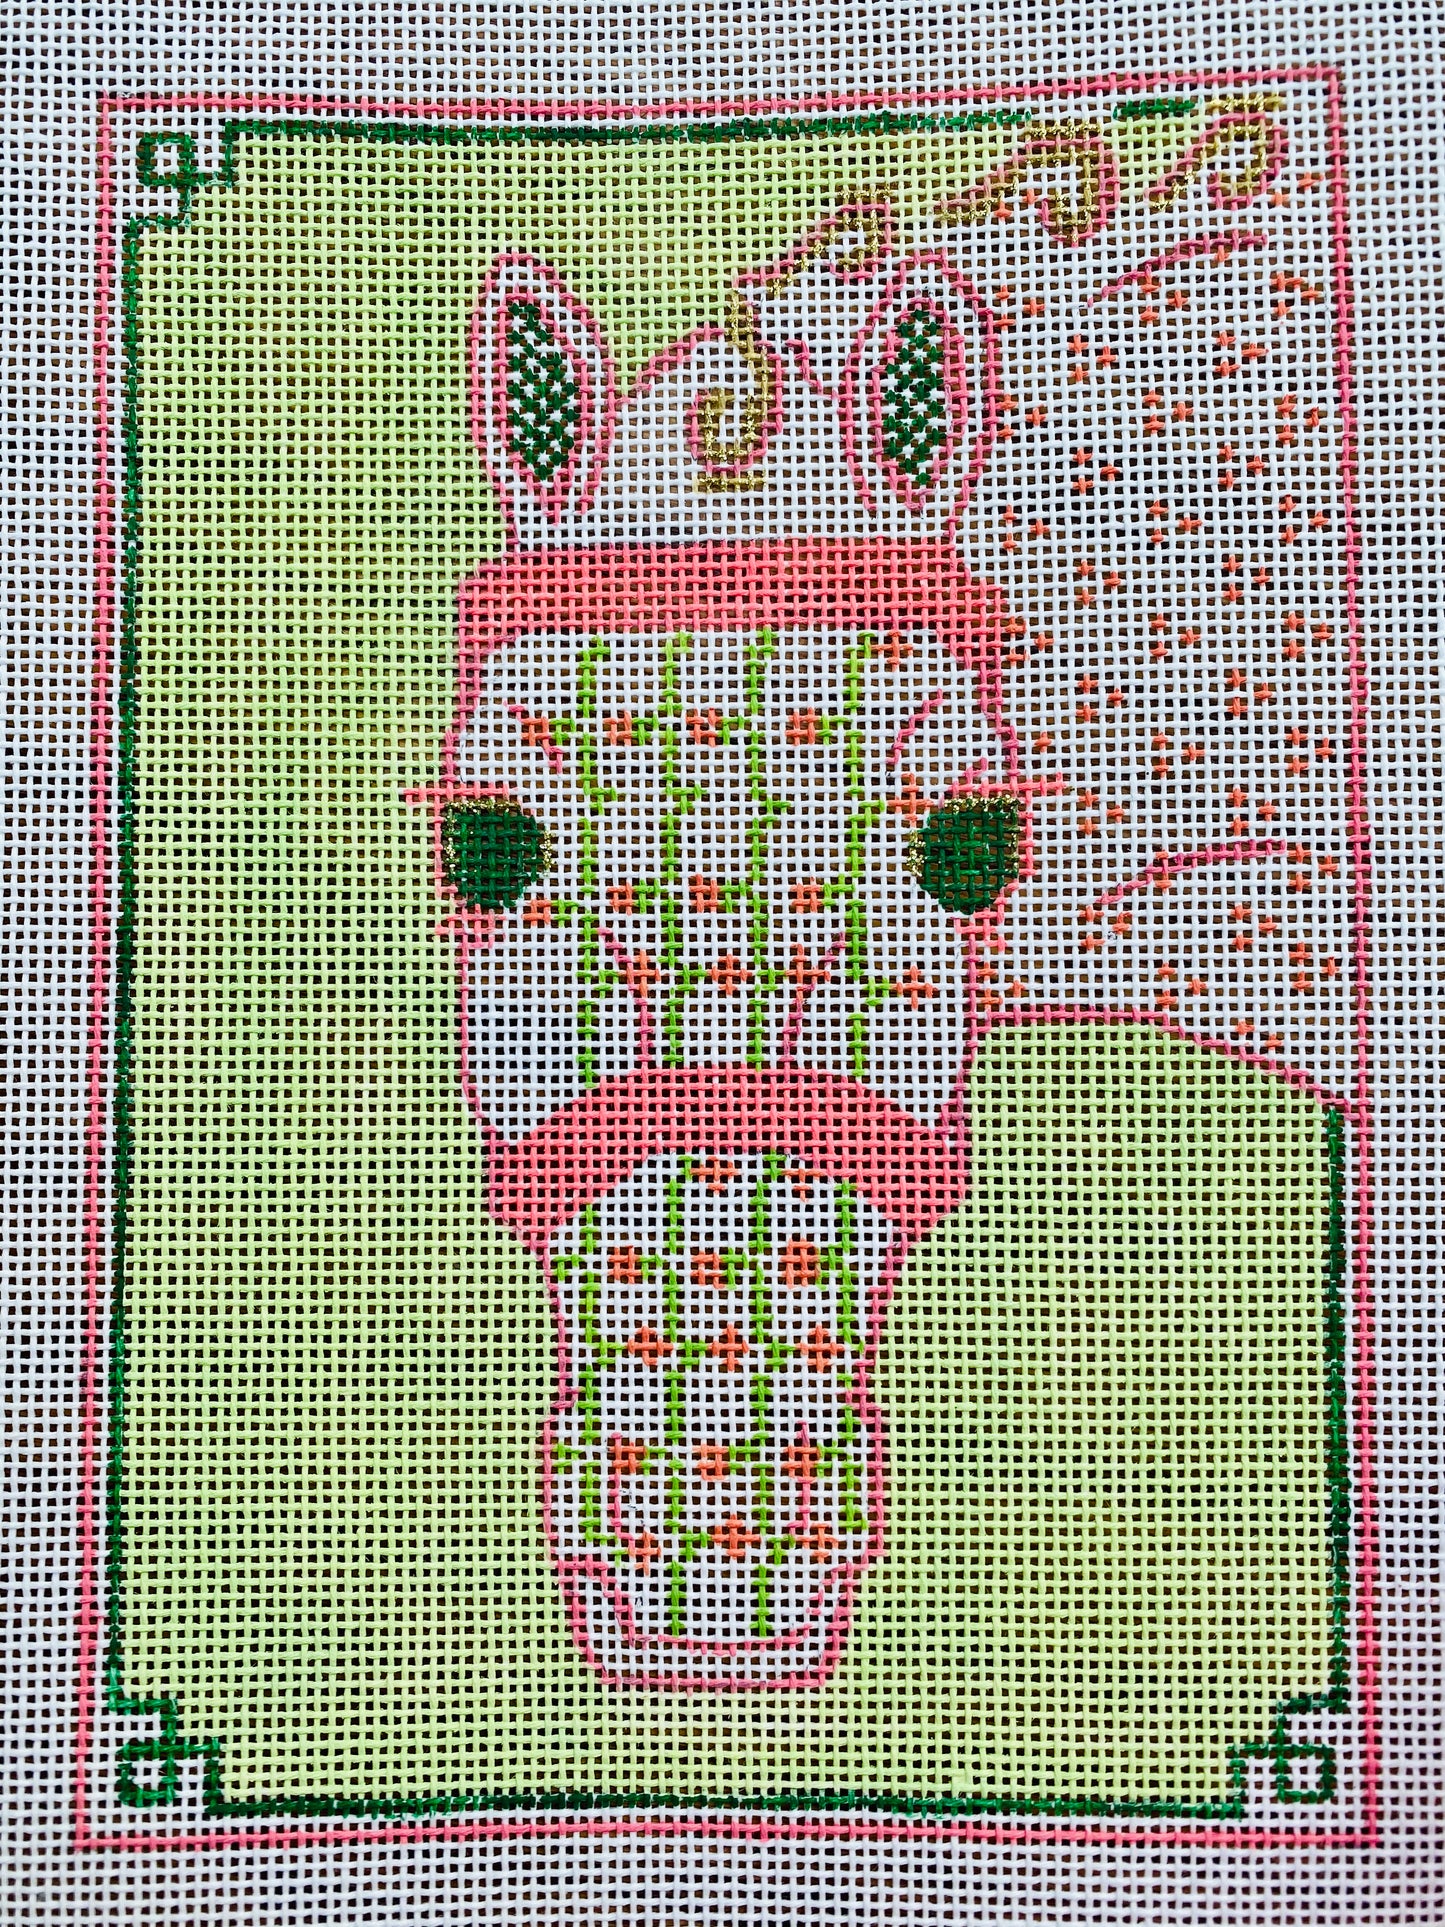 “FLORAL HORSE”, 5.25" x 7.5" on 18 mesh